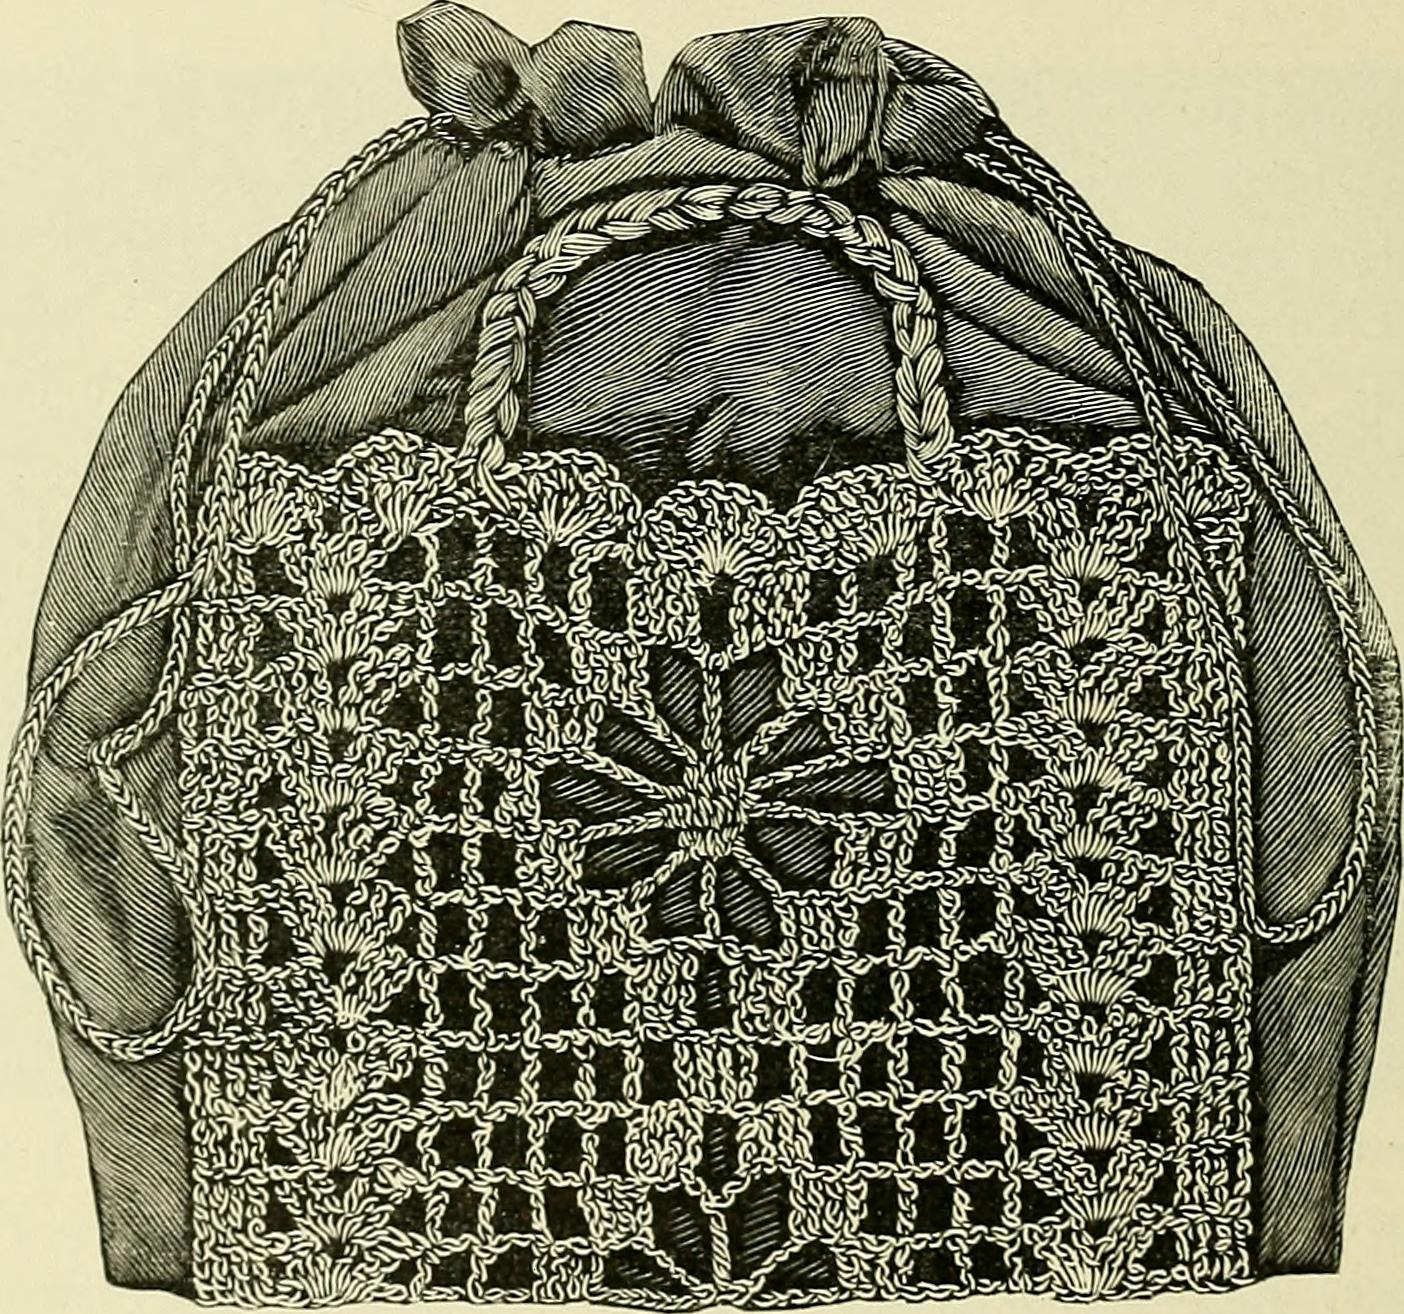 Image from page 121 of "A treatise on lace-making, embroidery, and needle-work with Irish flax threads" (1892)